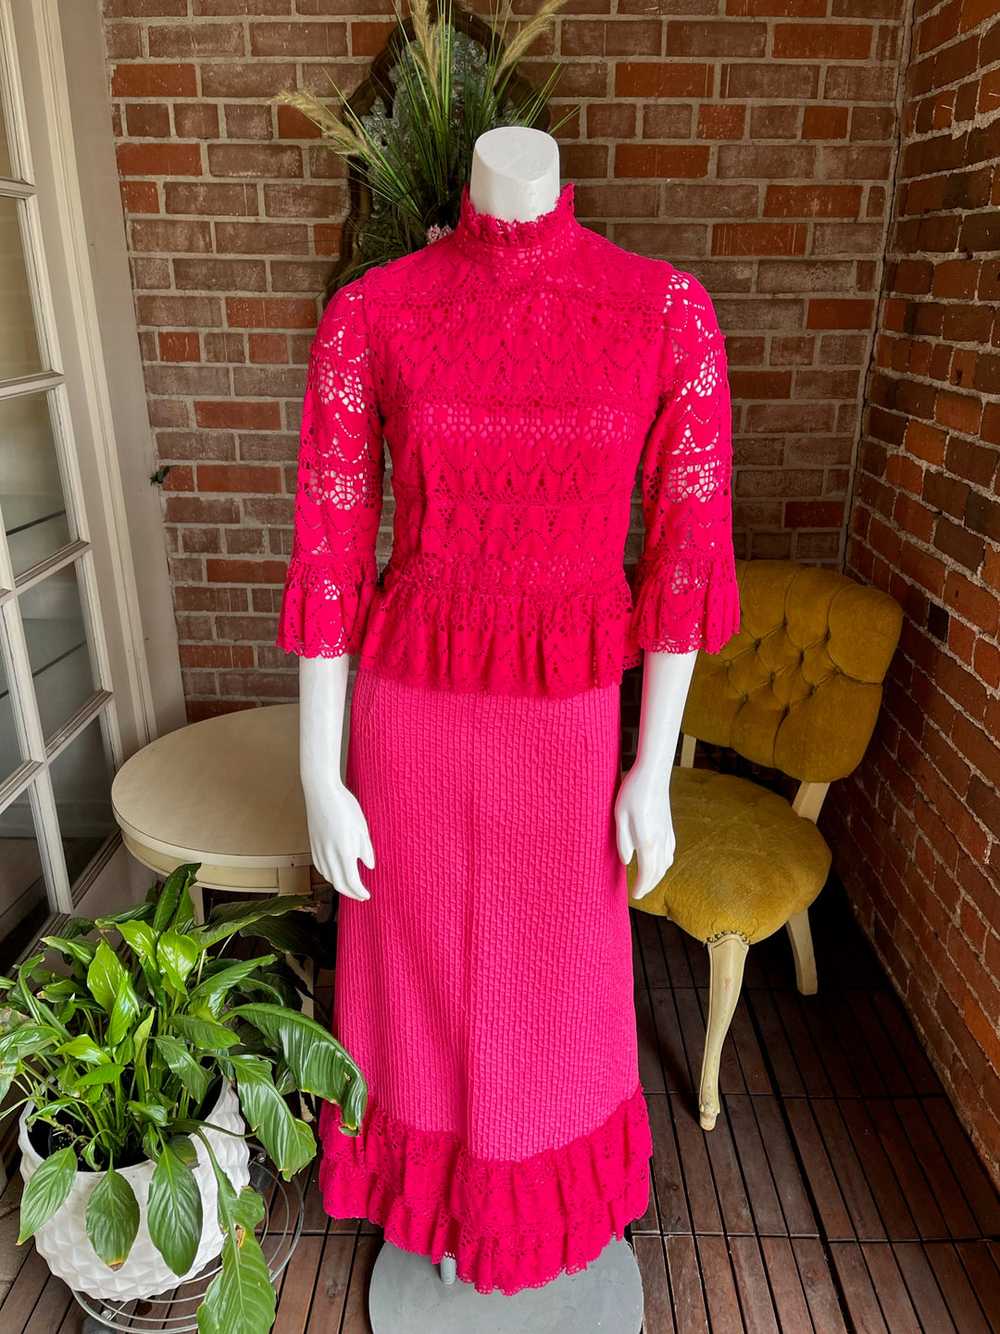 1960s Hot Pink Lace Mexican Dress - image 2